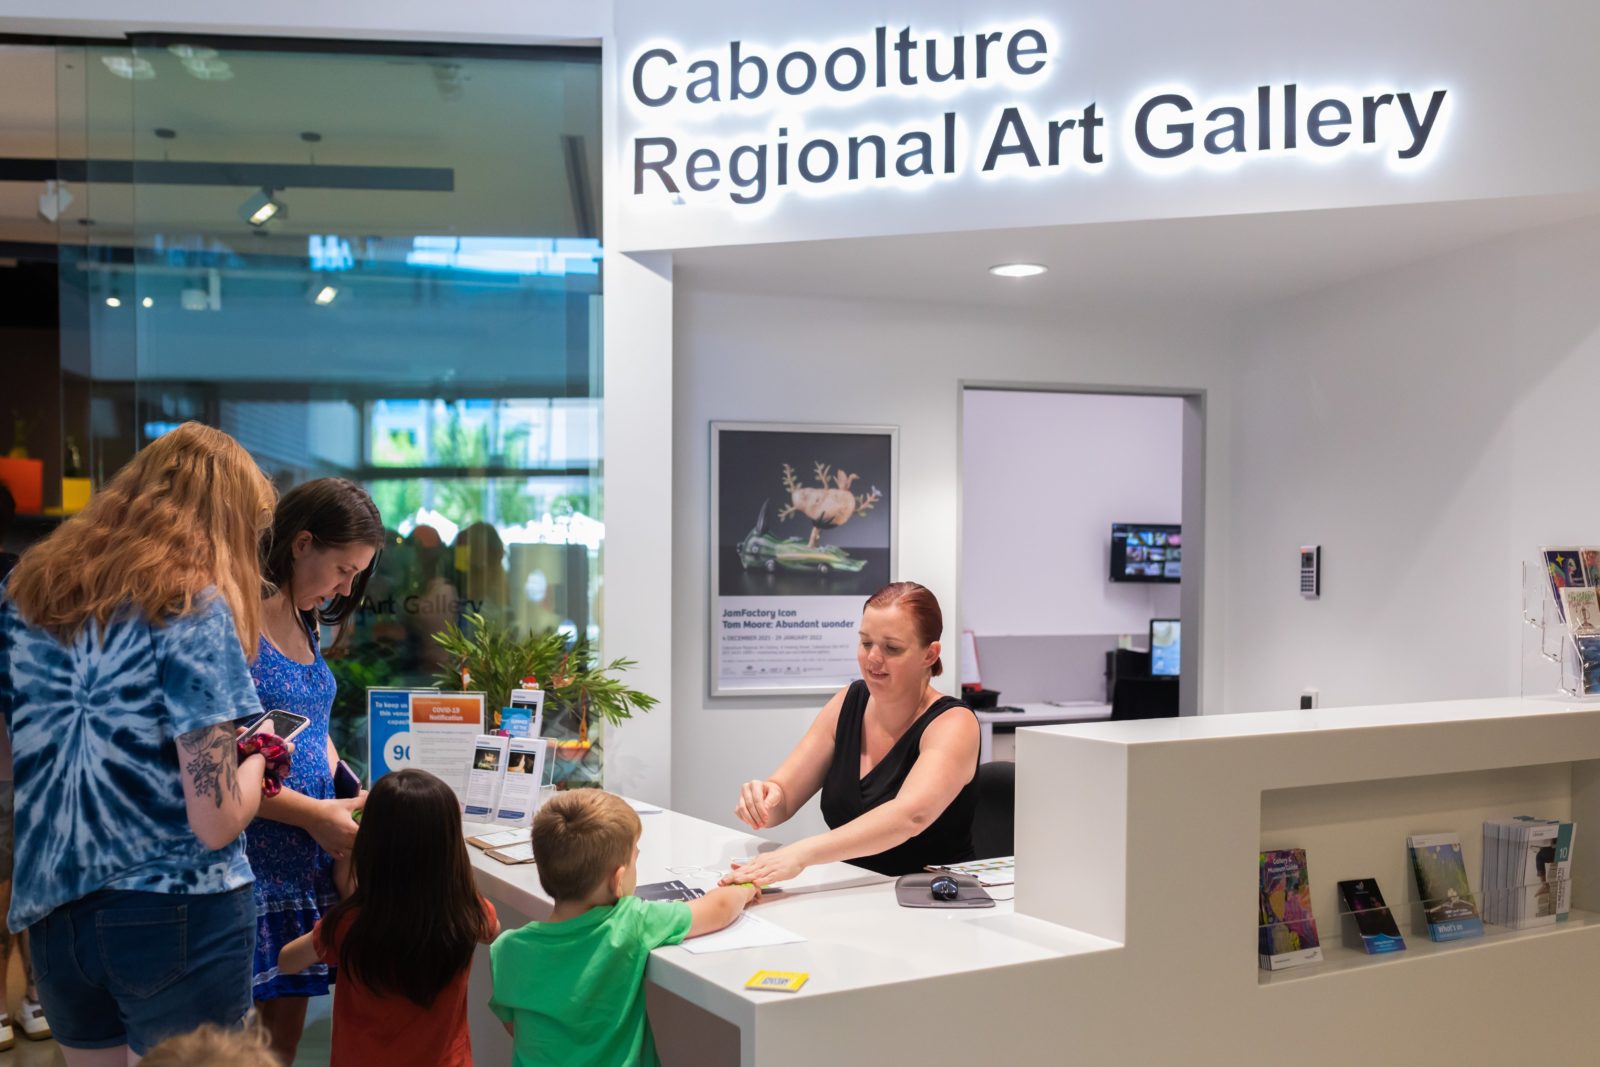 Family interacting with Caboolture Regional Art Gallery team at front desk